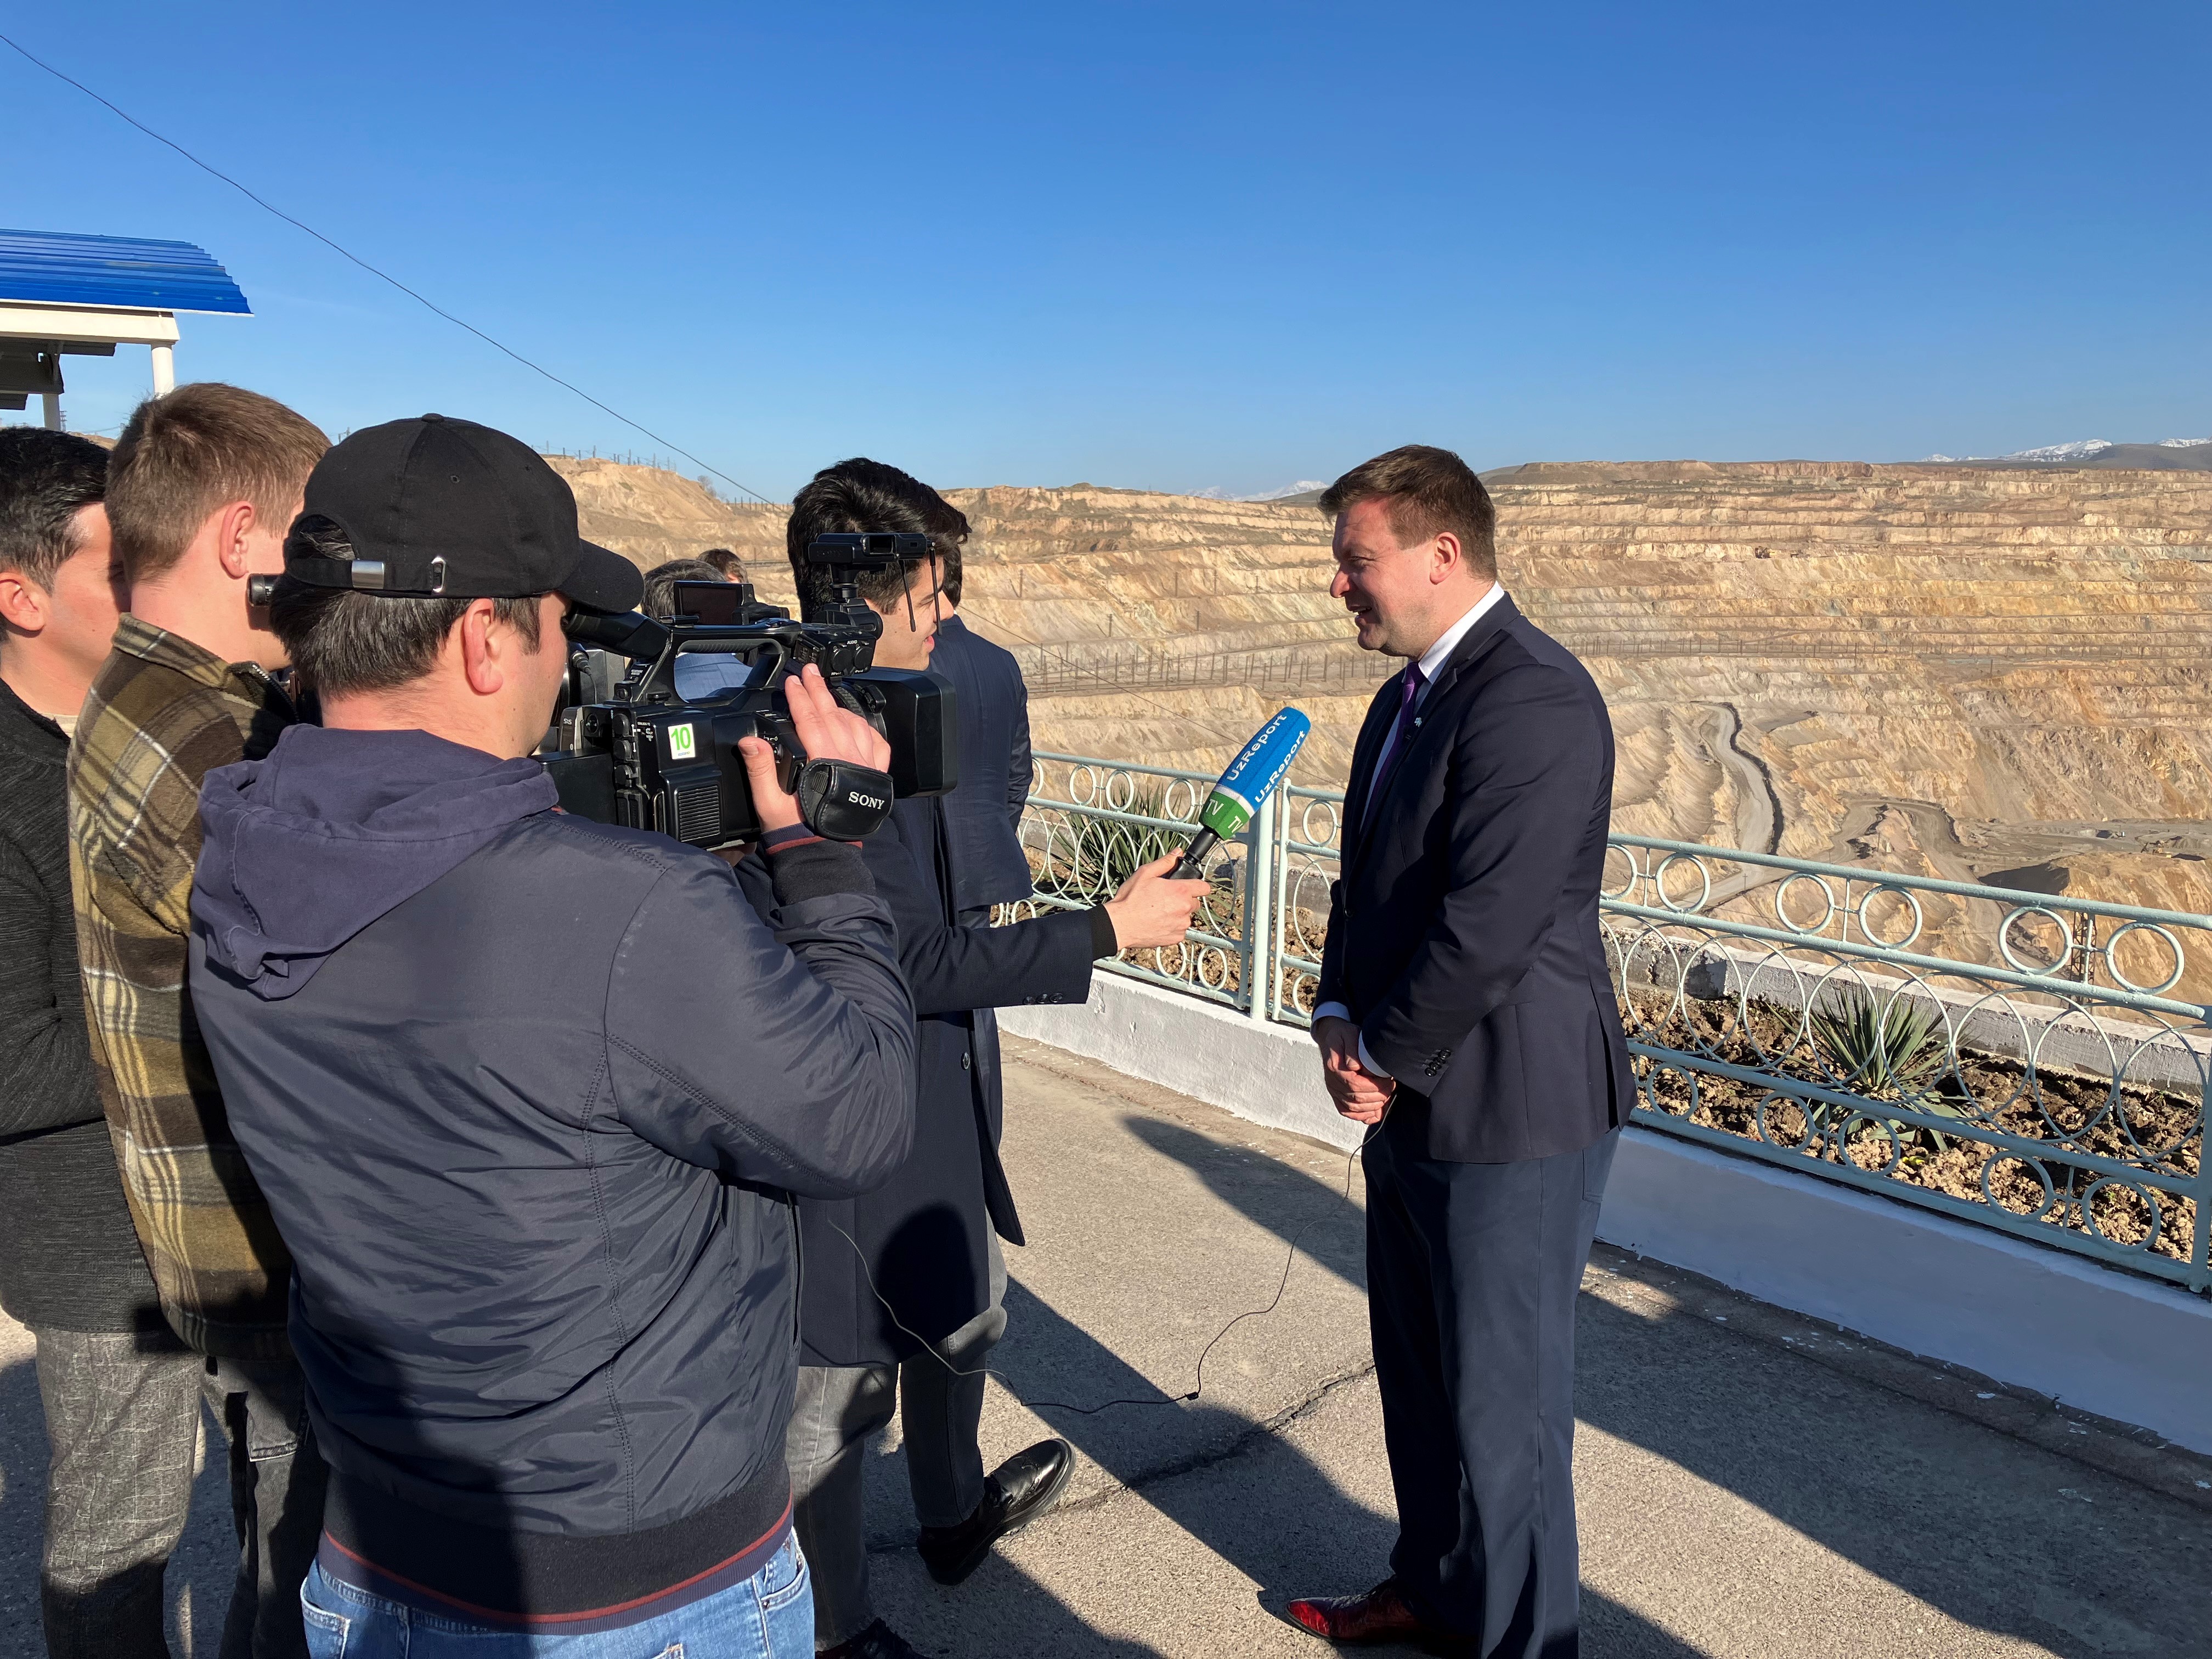 Minister for Development Cooperation and Foreign Trade Ville Skinnari is talking with Uzbek media at the Almalyk copper mine. Photo: Olli Nurmi